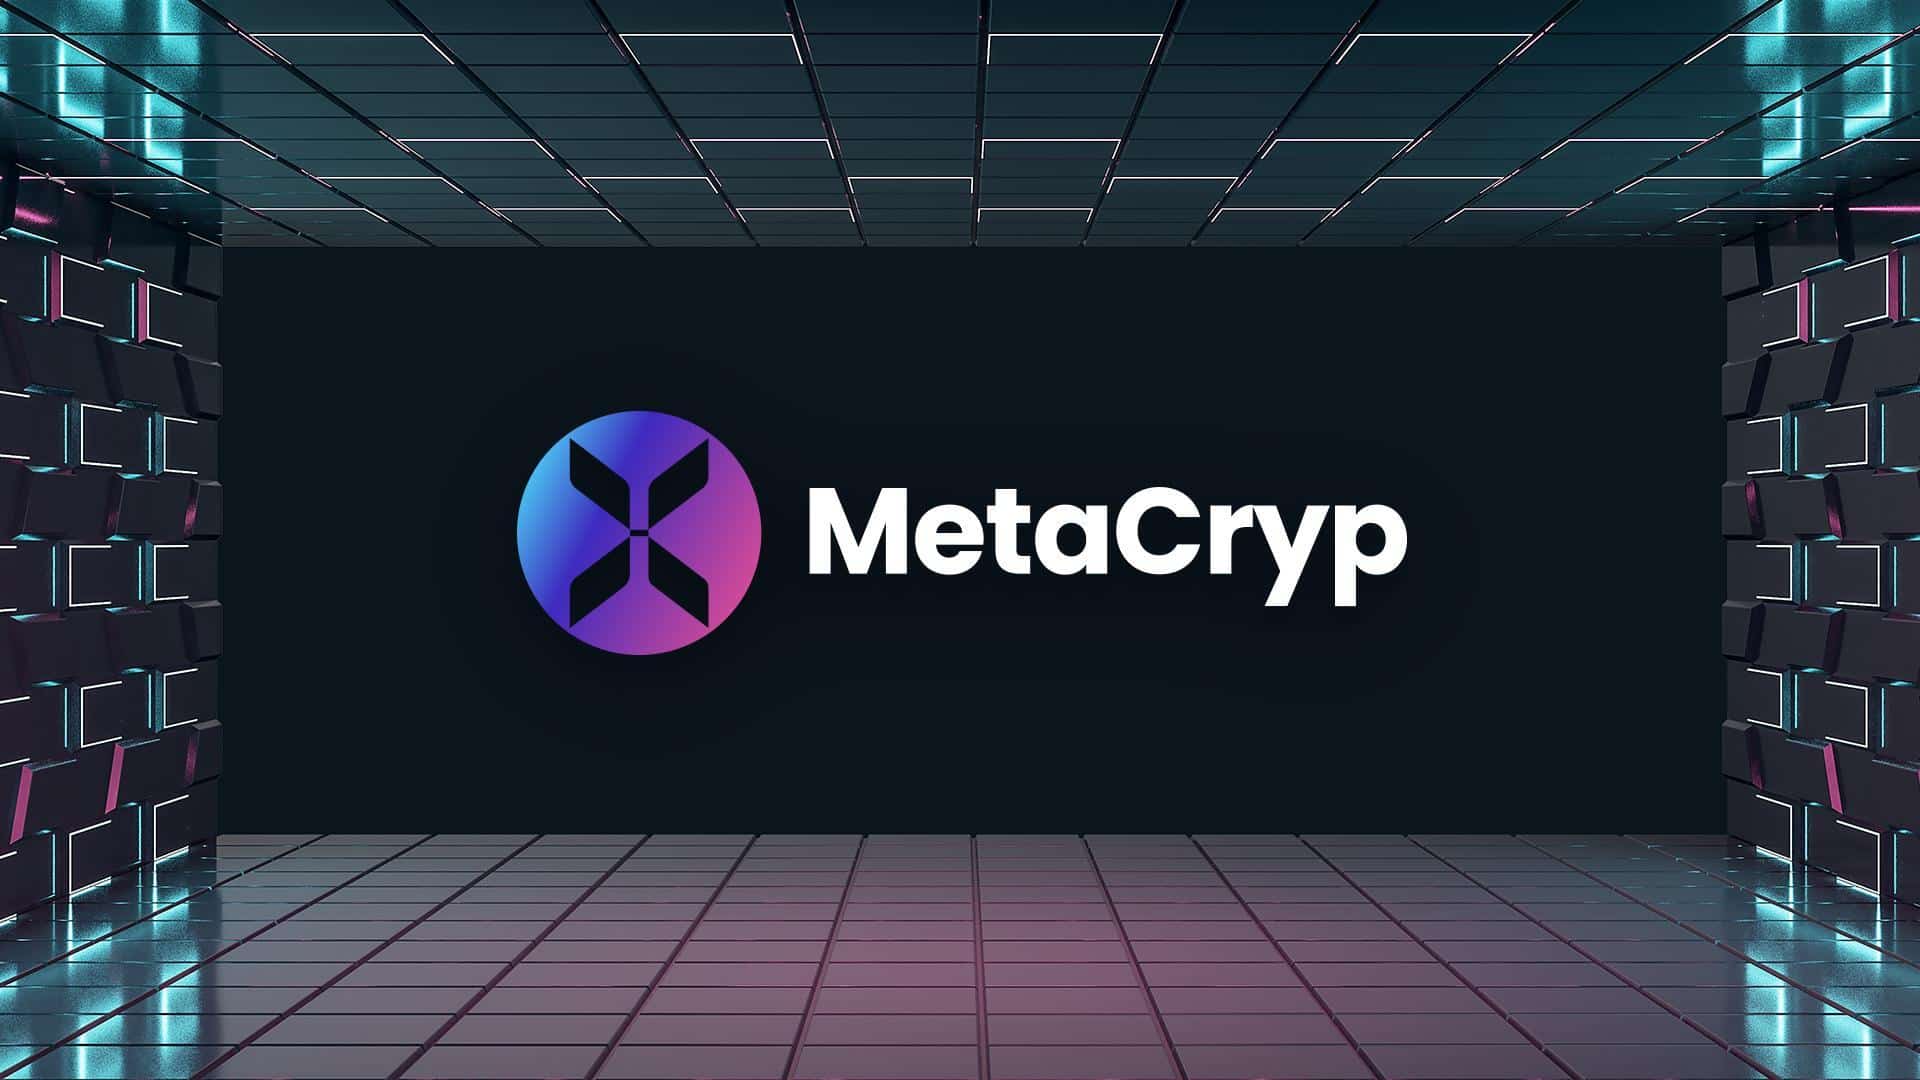 Pancakeswap And Metacryp  Two Platforms With Features Similar To The Ethereum Blockchain